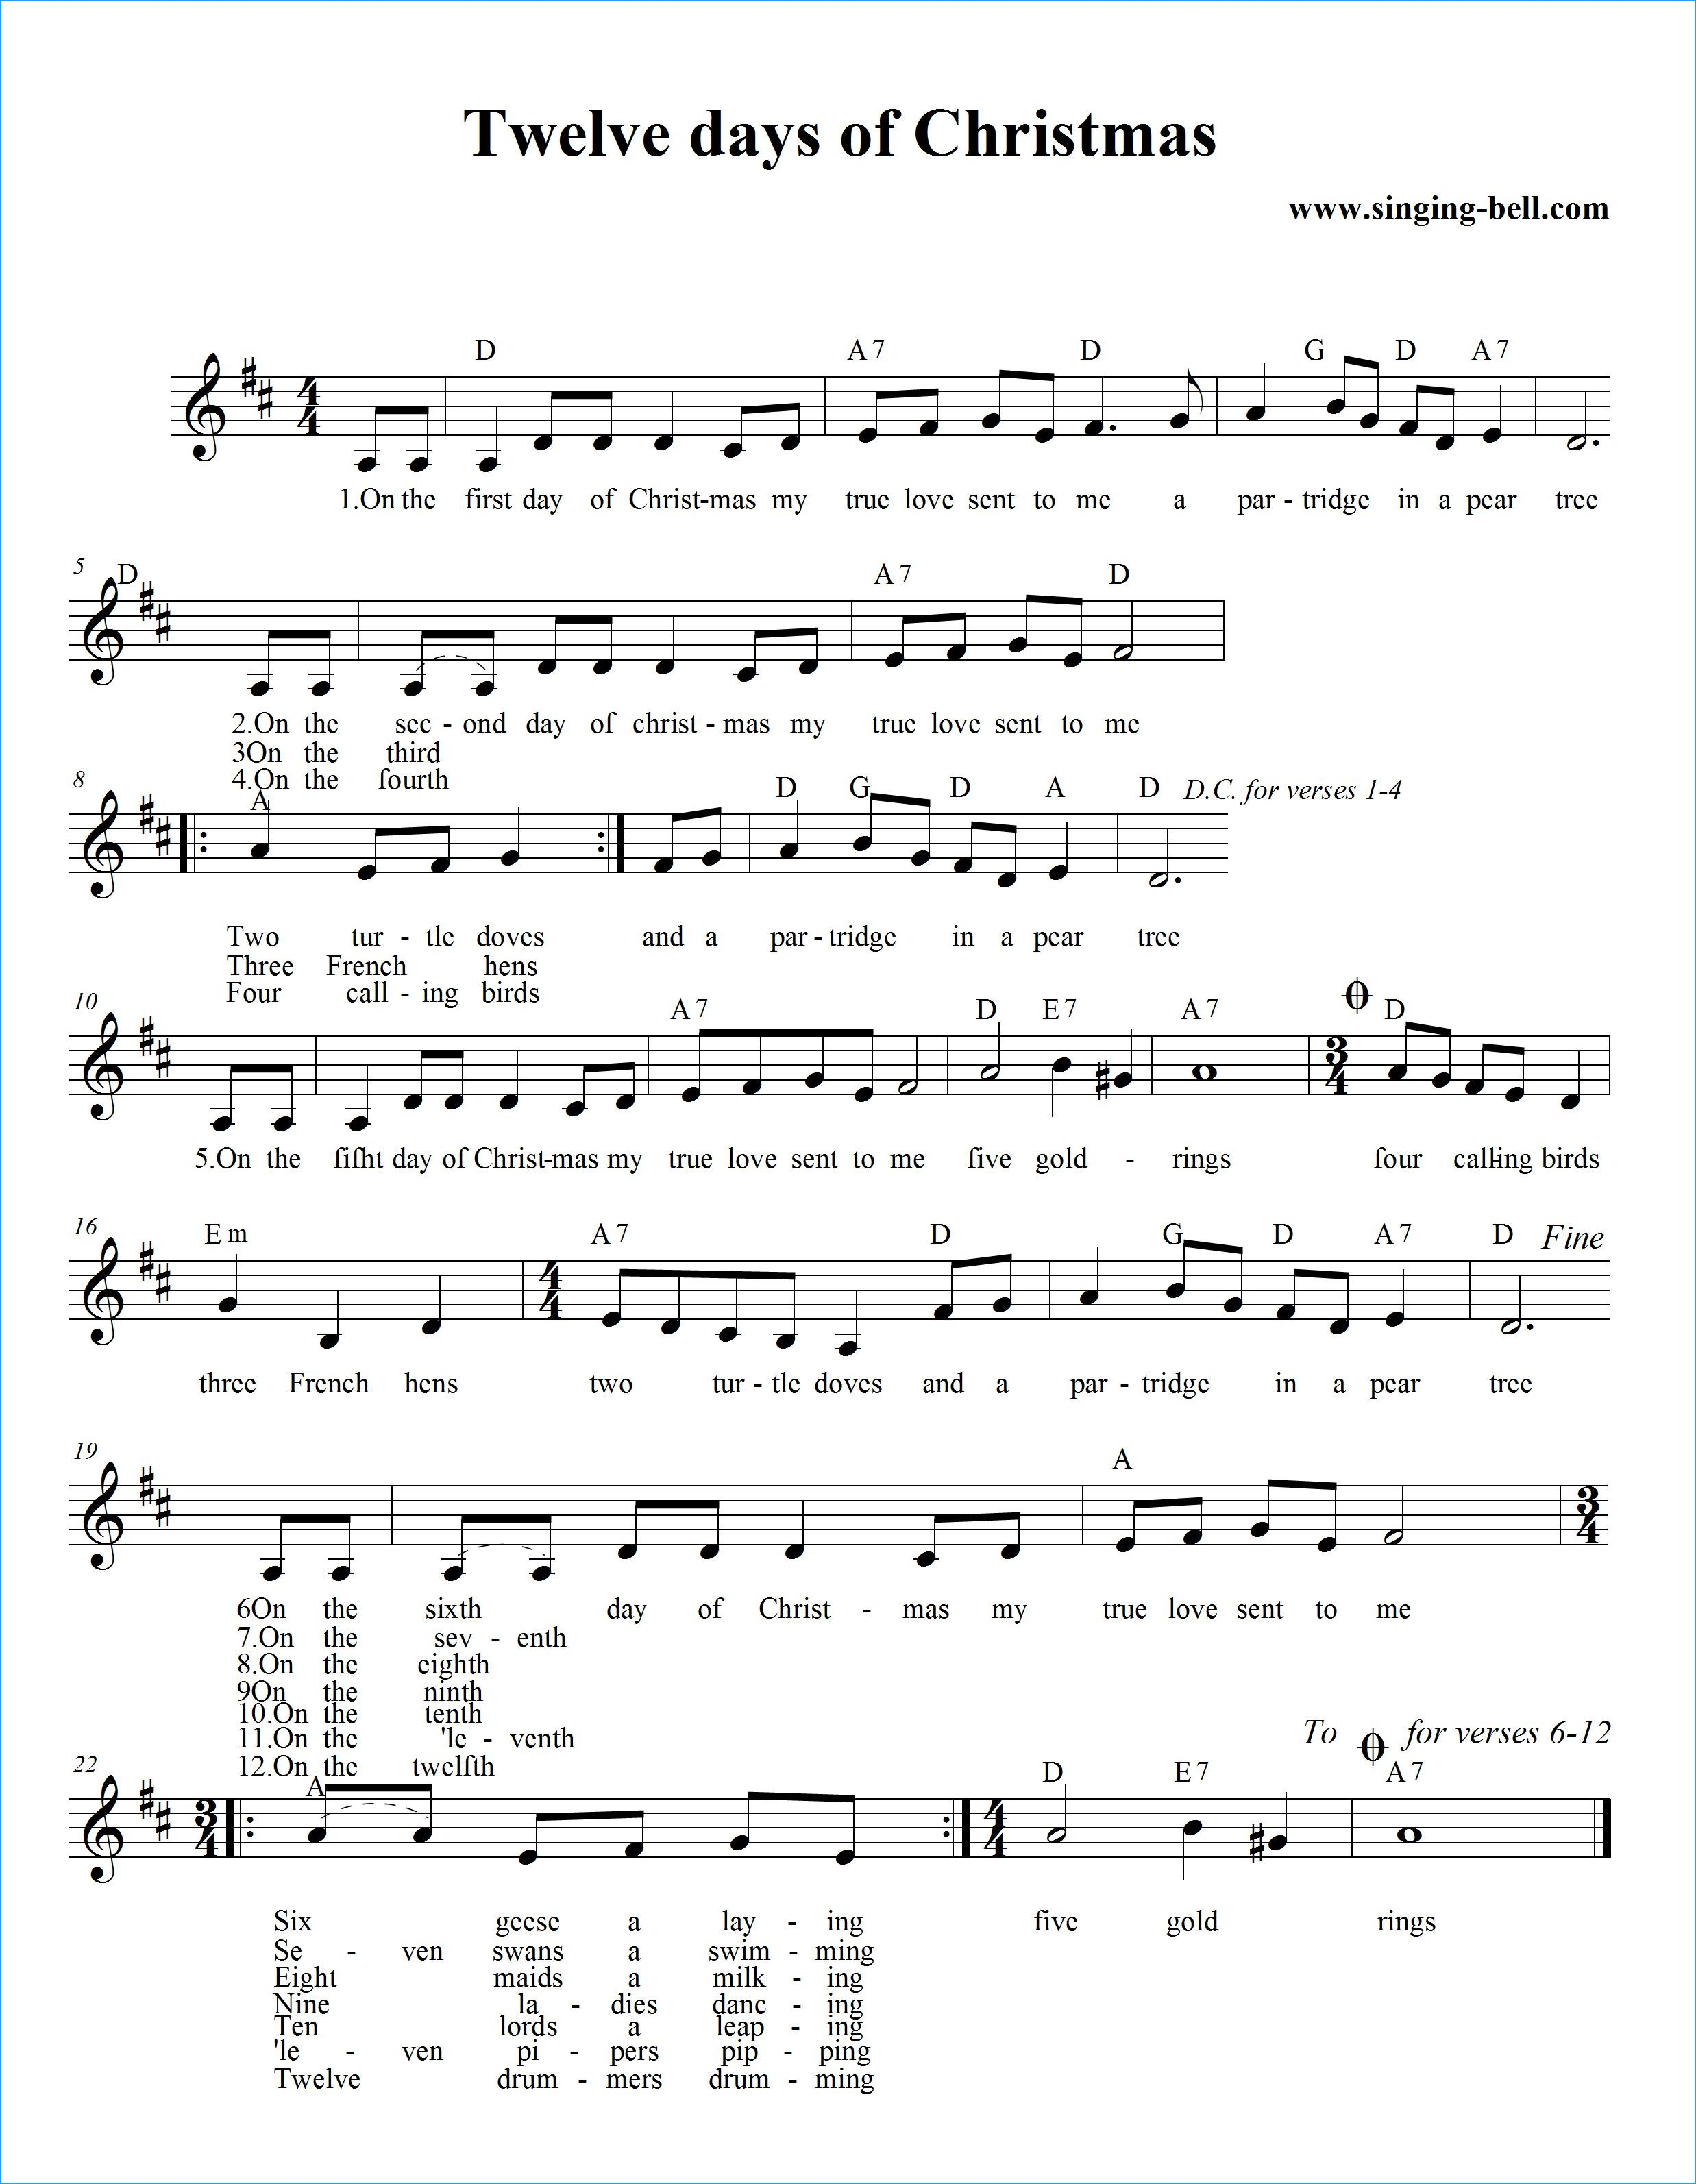 Periodic Table Song Sheet Music Unique Free Printable Sheet Music - Free Printable Sheet Music Lyrics